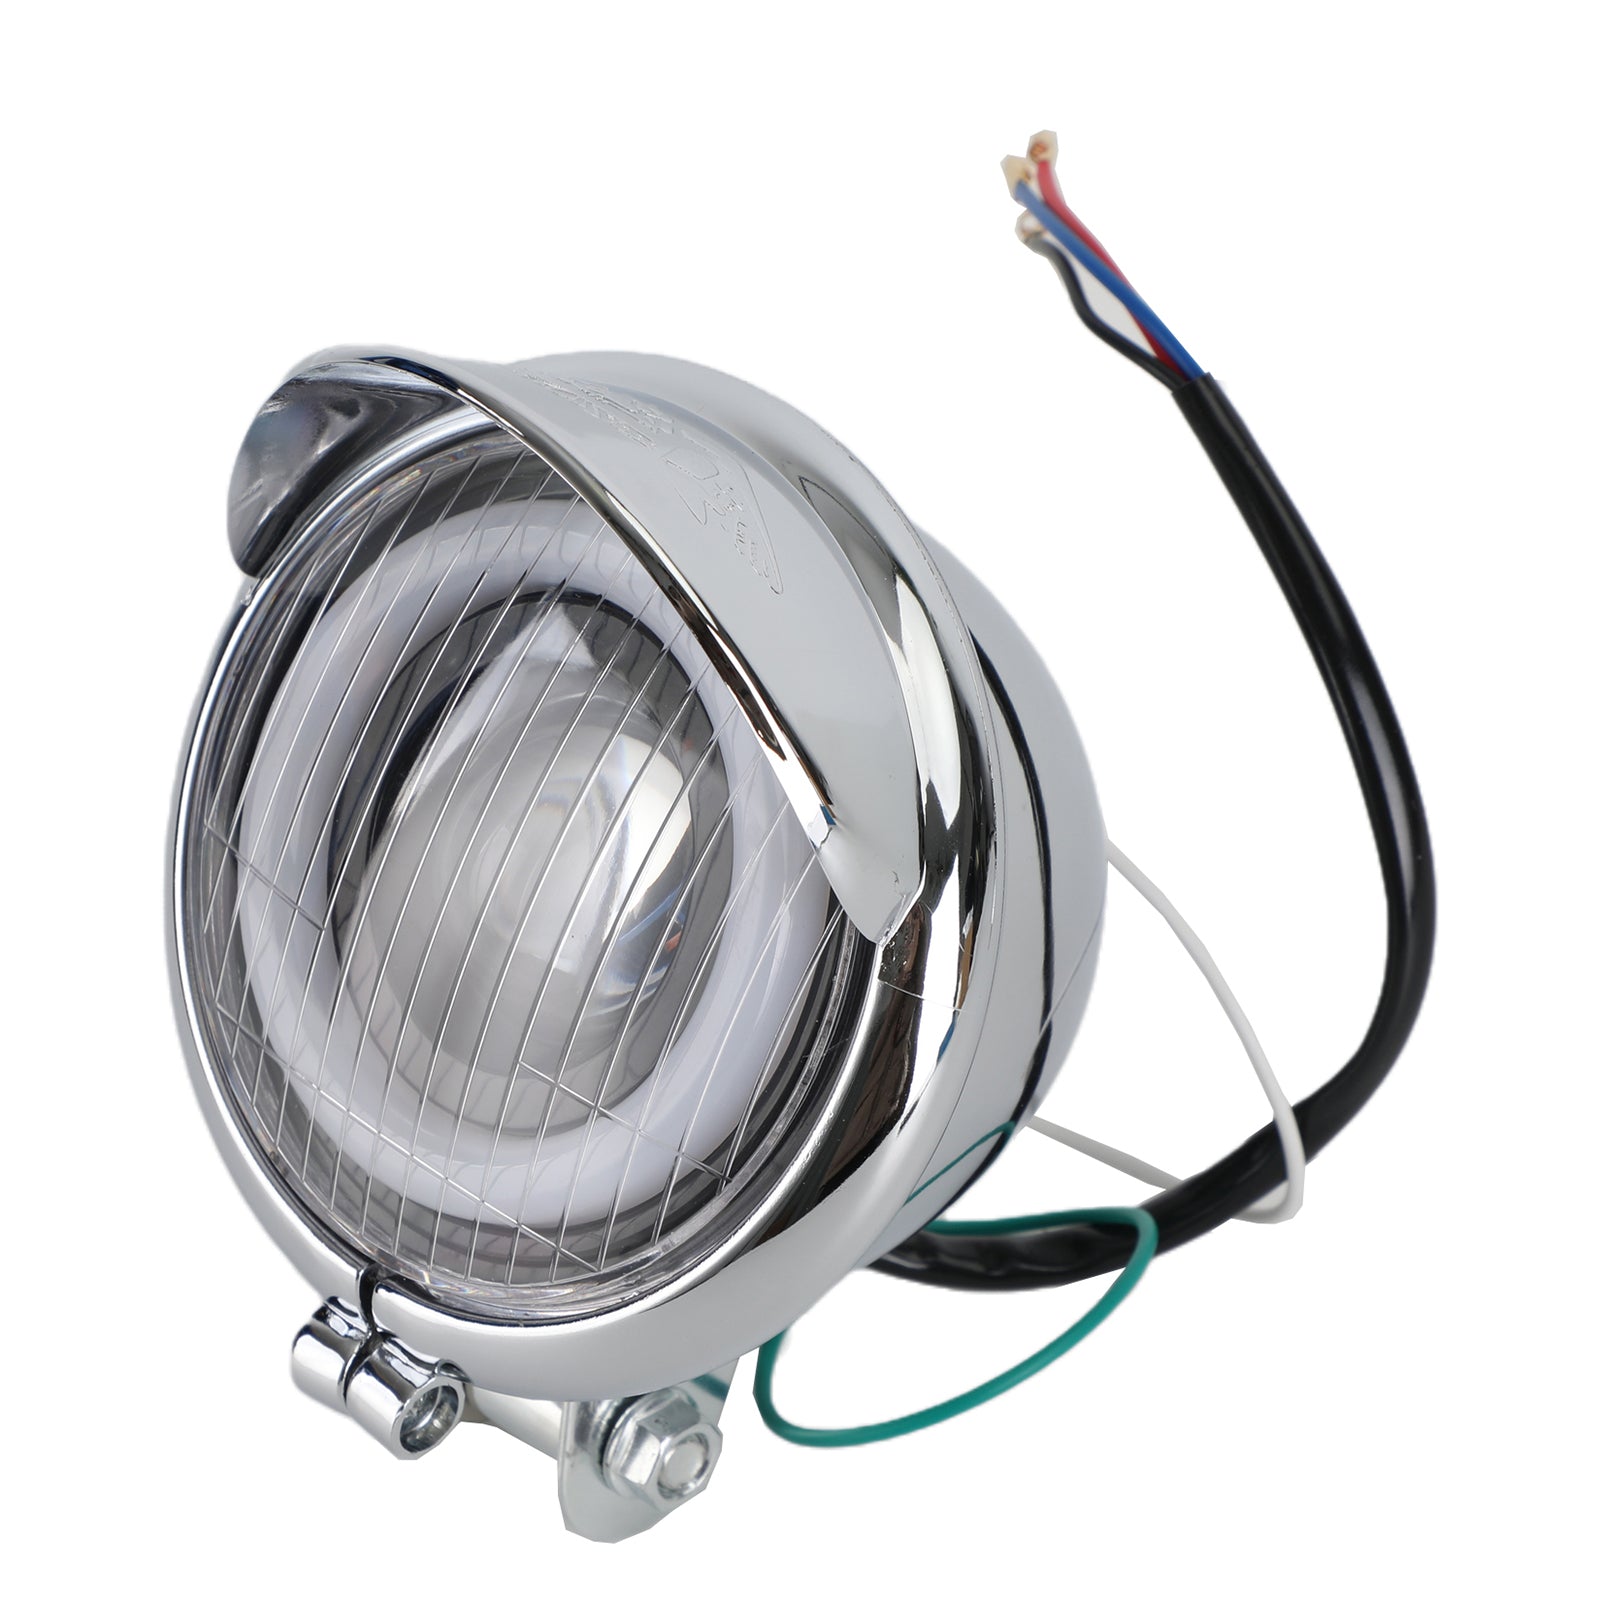 R.J.VON - Inner Outer Ring Head Light Headlight Frame for RE  Classic,Electra,Standard 350,500 cc : Amazon.in: Car & Motorbike